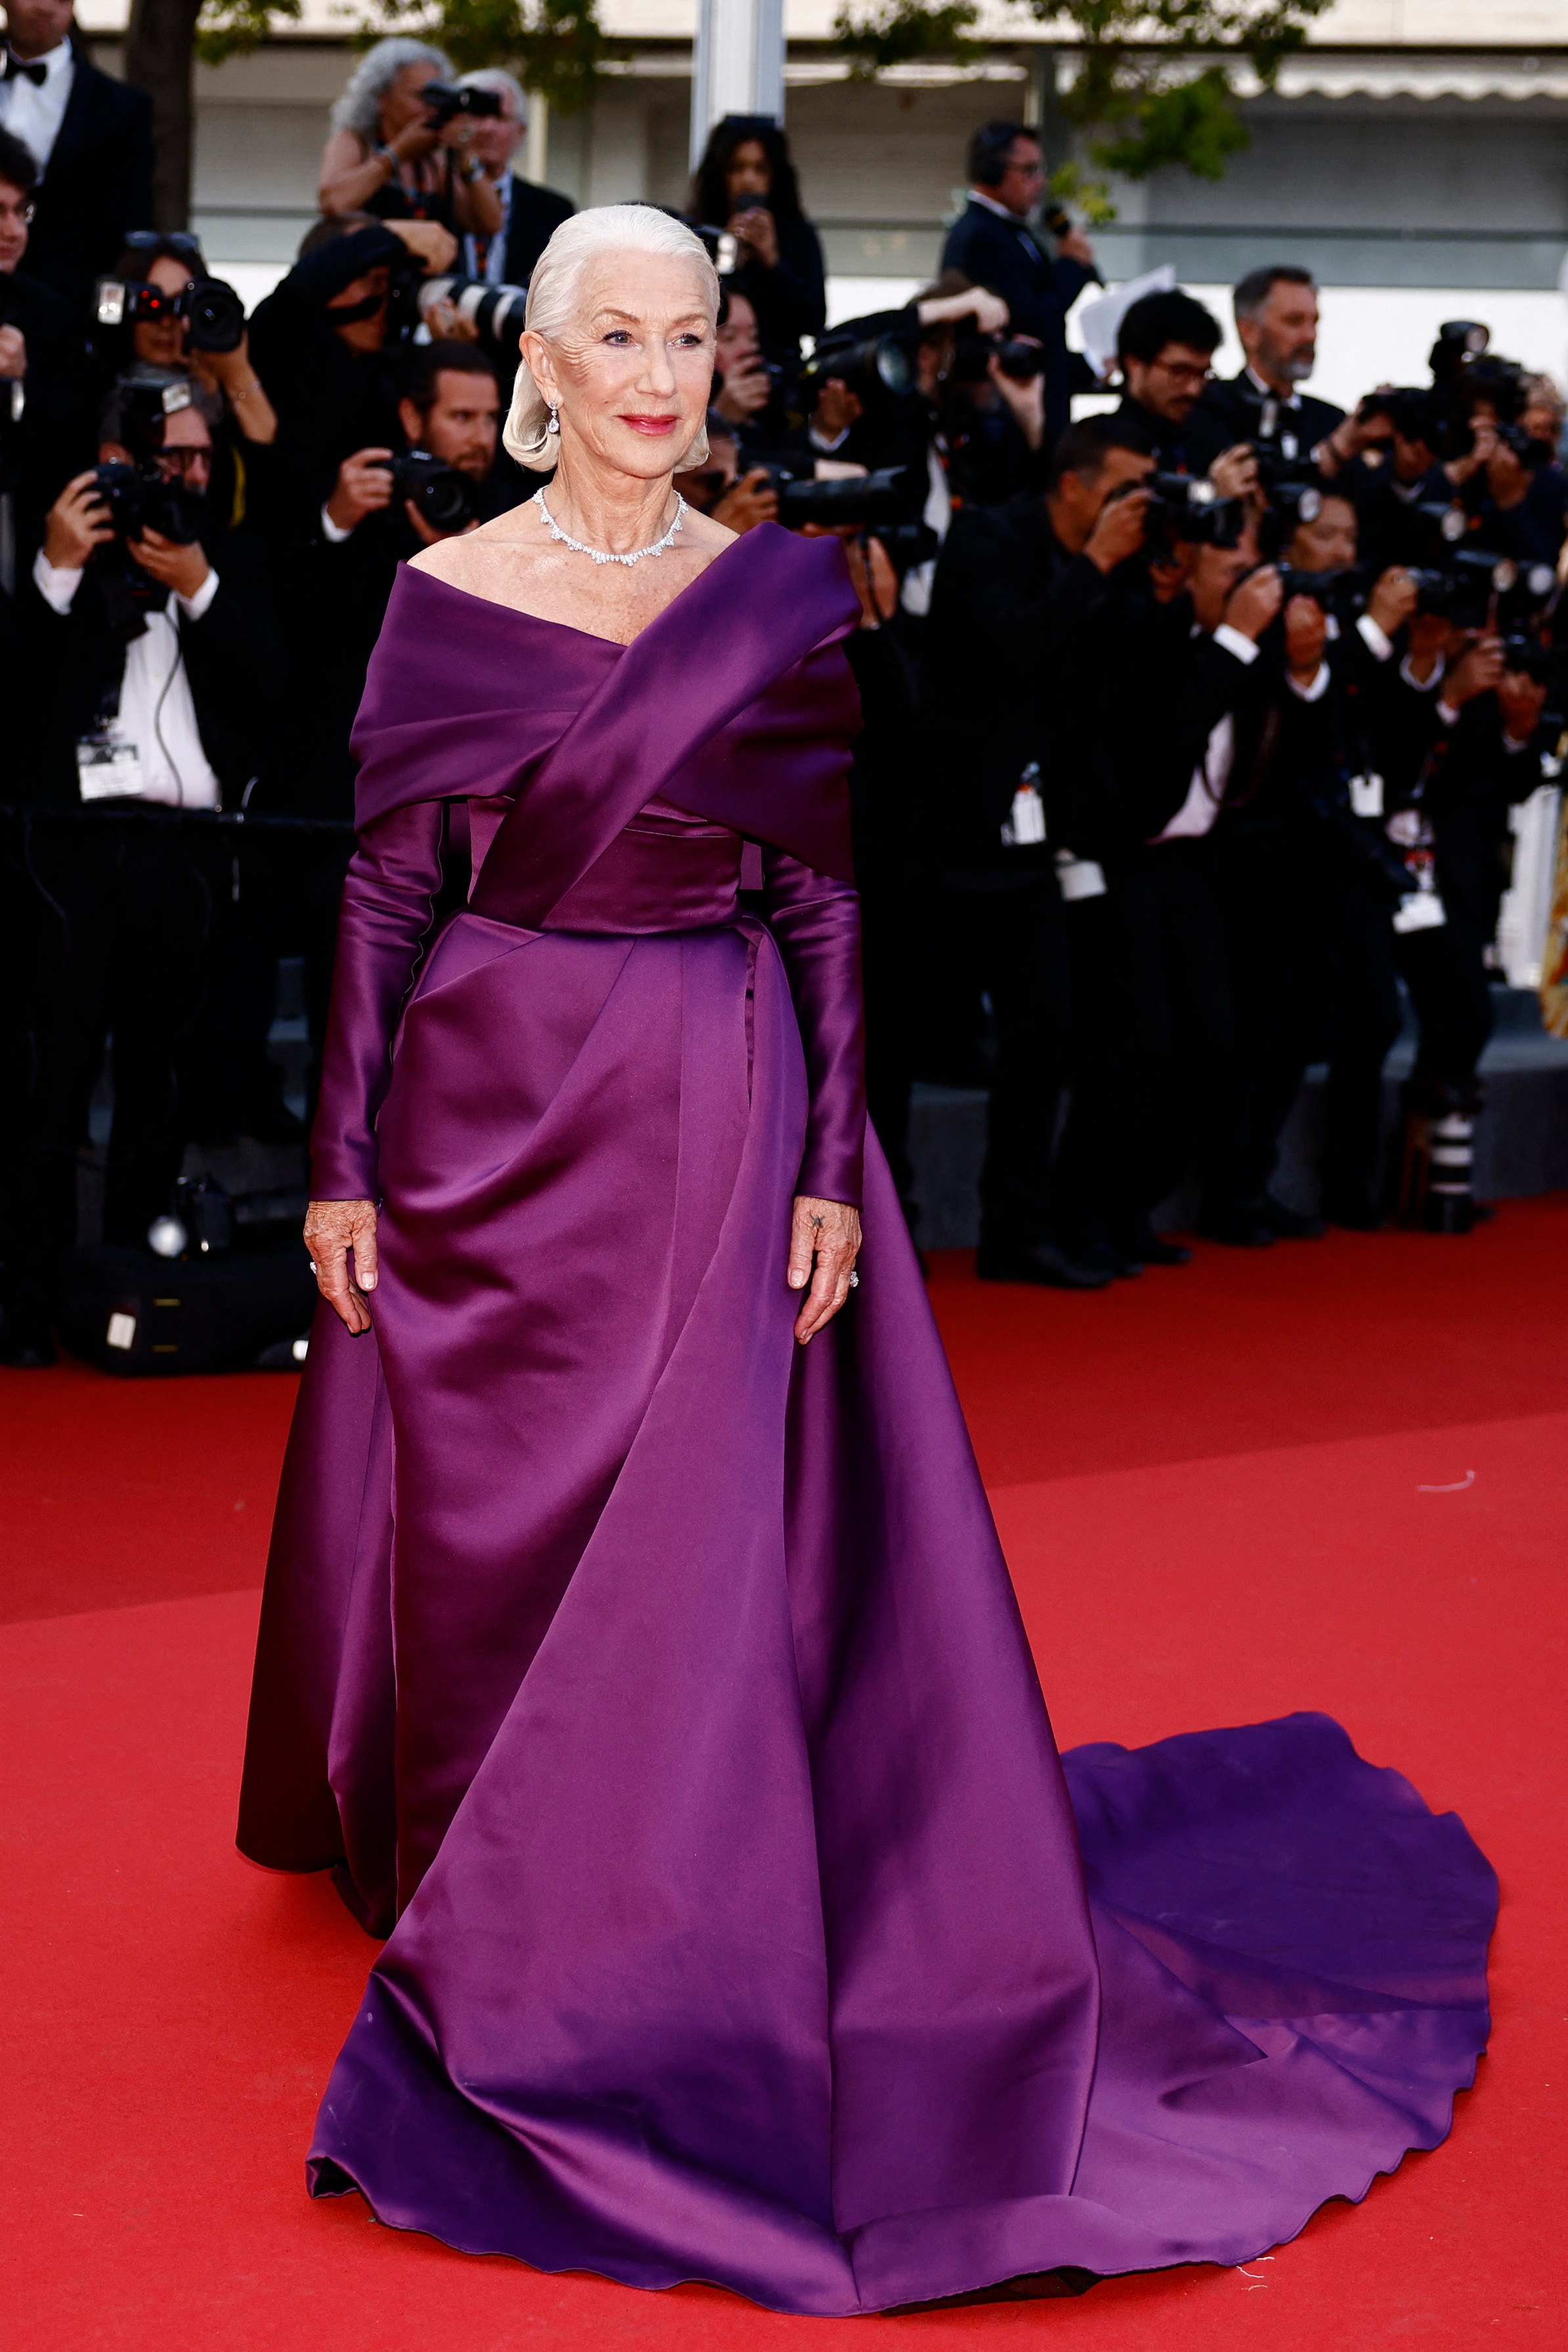 Helen Mirren wearing a long silky purple dress with off-the-shoulder long sleeves and a slight train